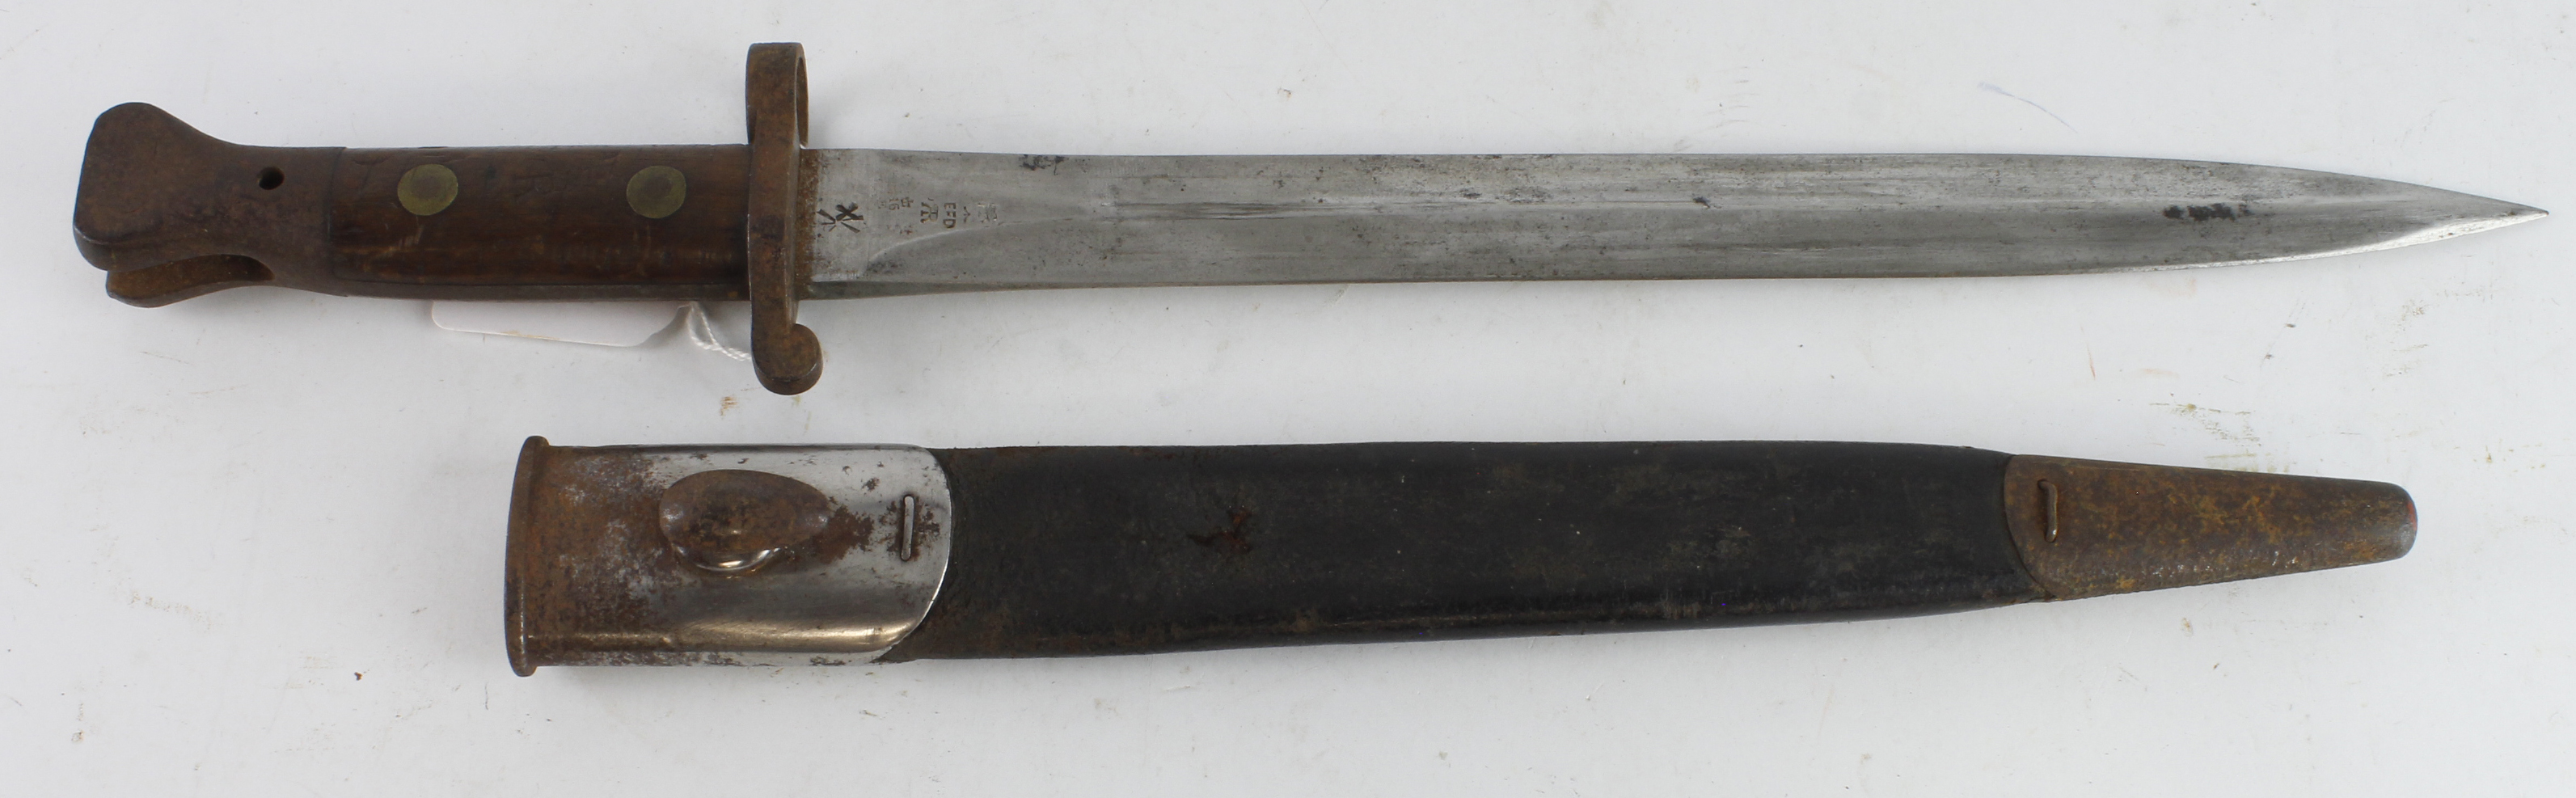 Pattern 1888 MkIII bayonet by Enfield and dated June 1900 (Boer War), service wear overall, good